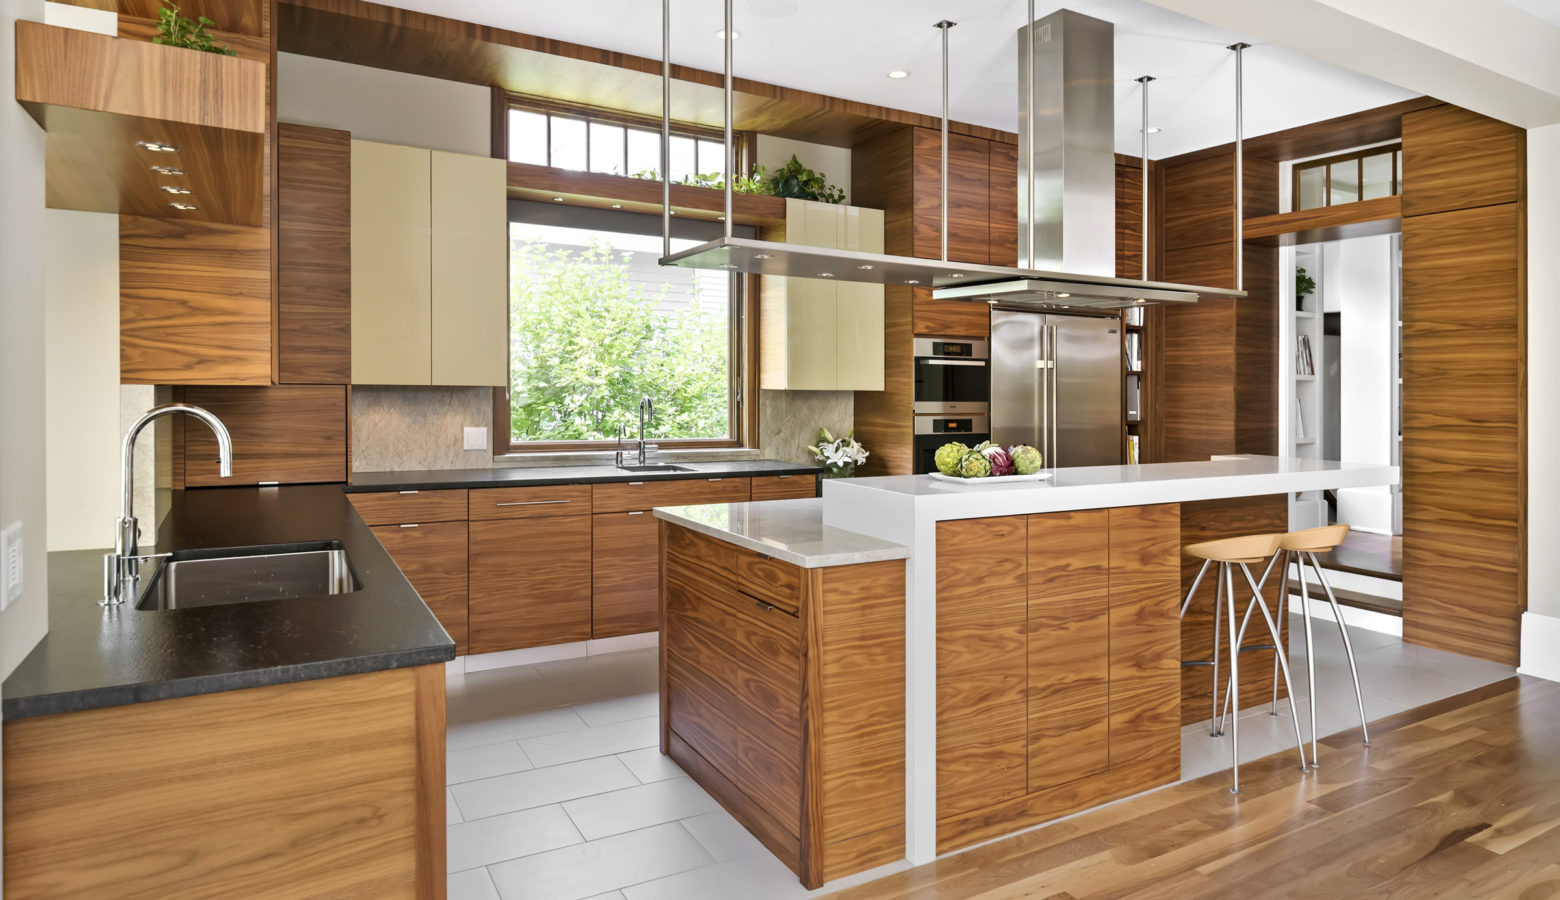 8 Kitchen Design Ideas to Make Your Home Special